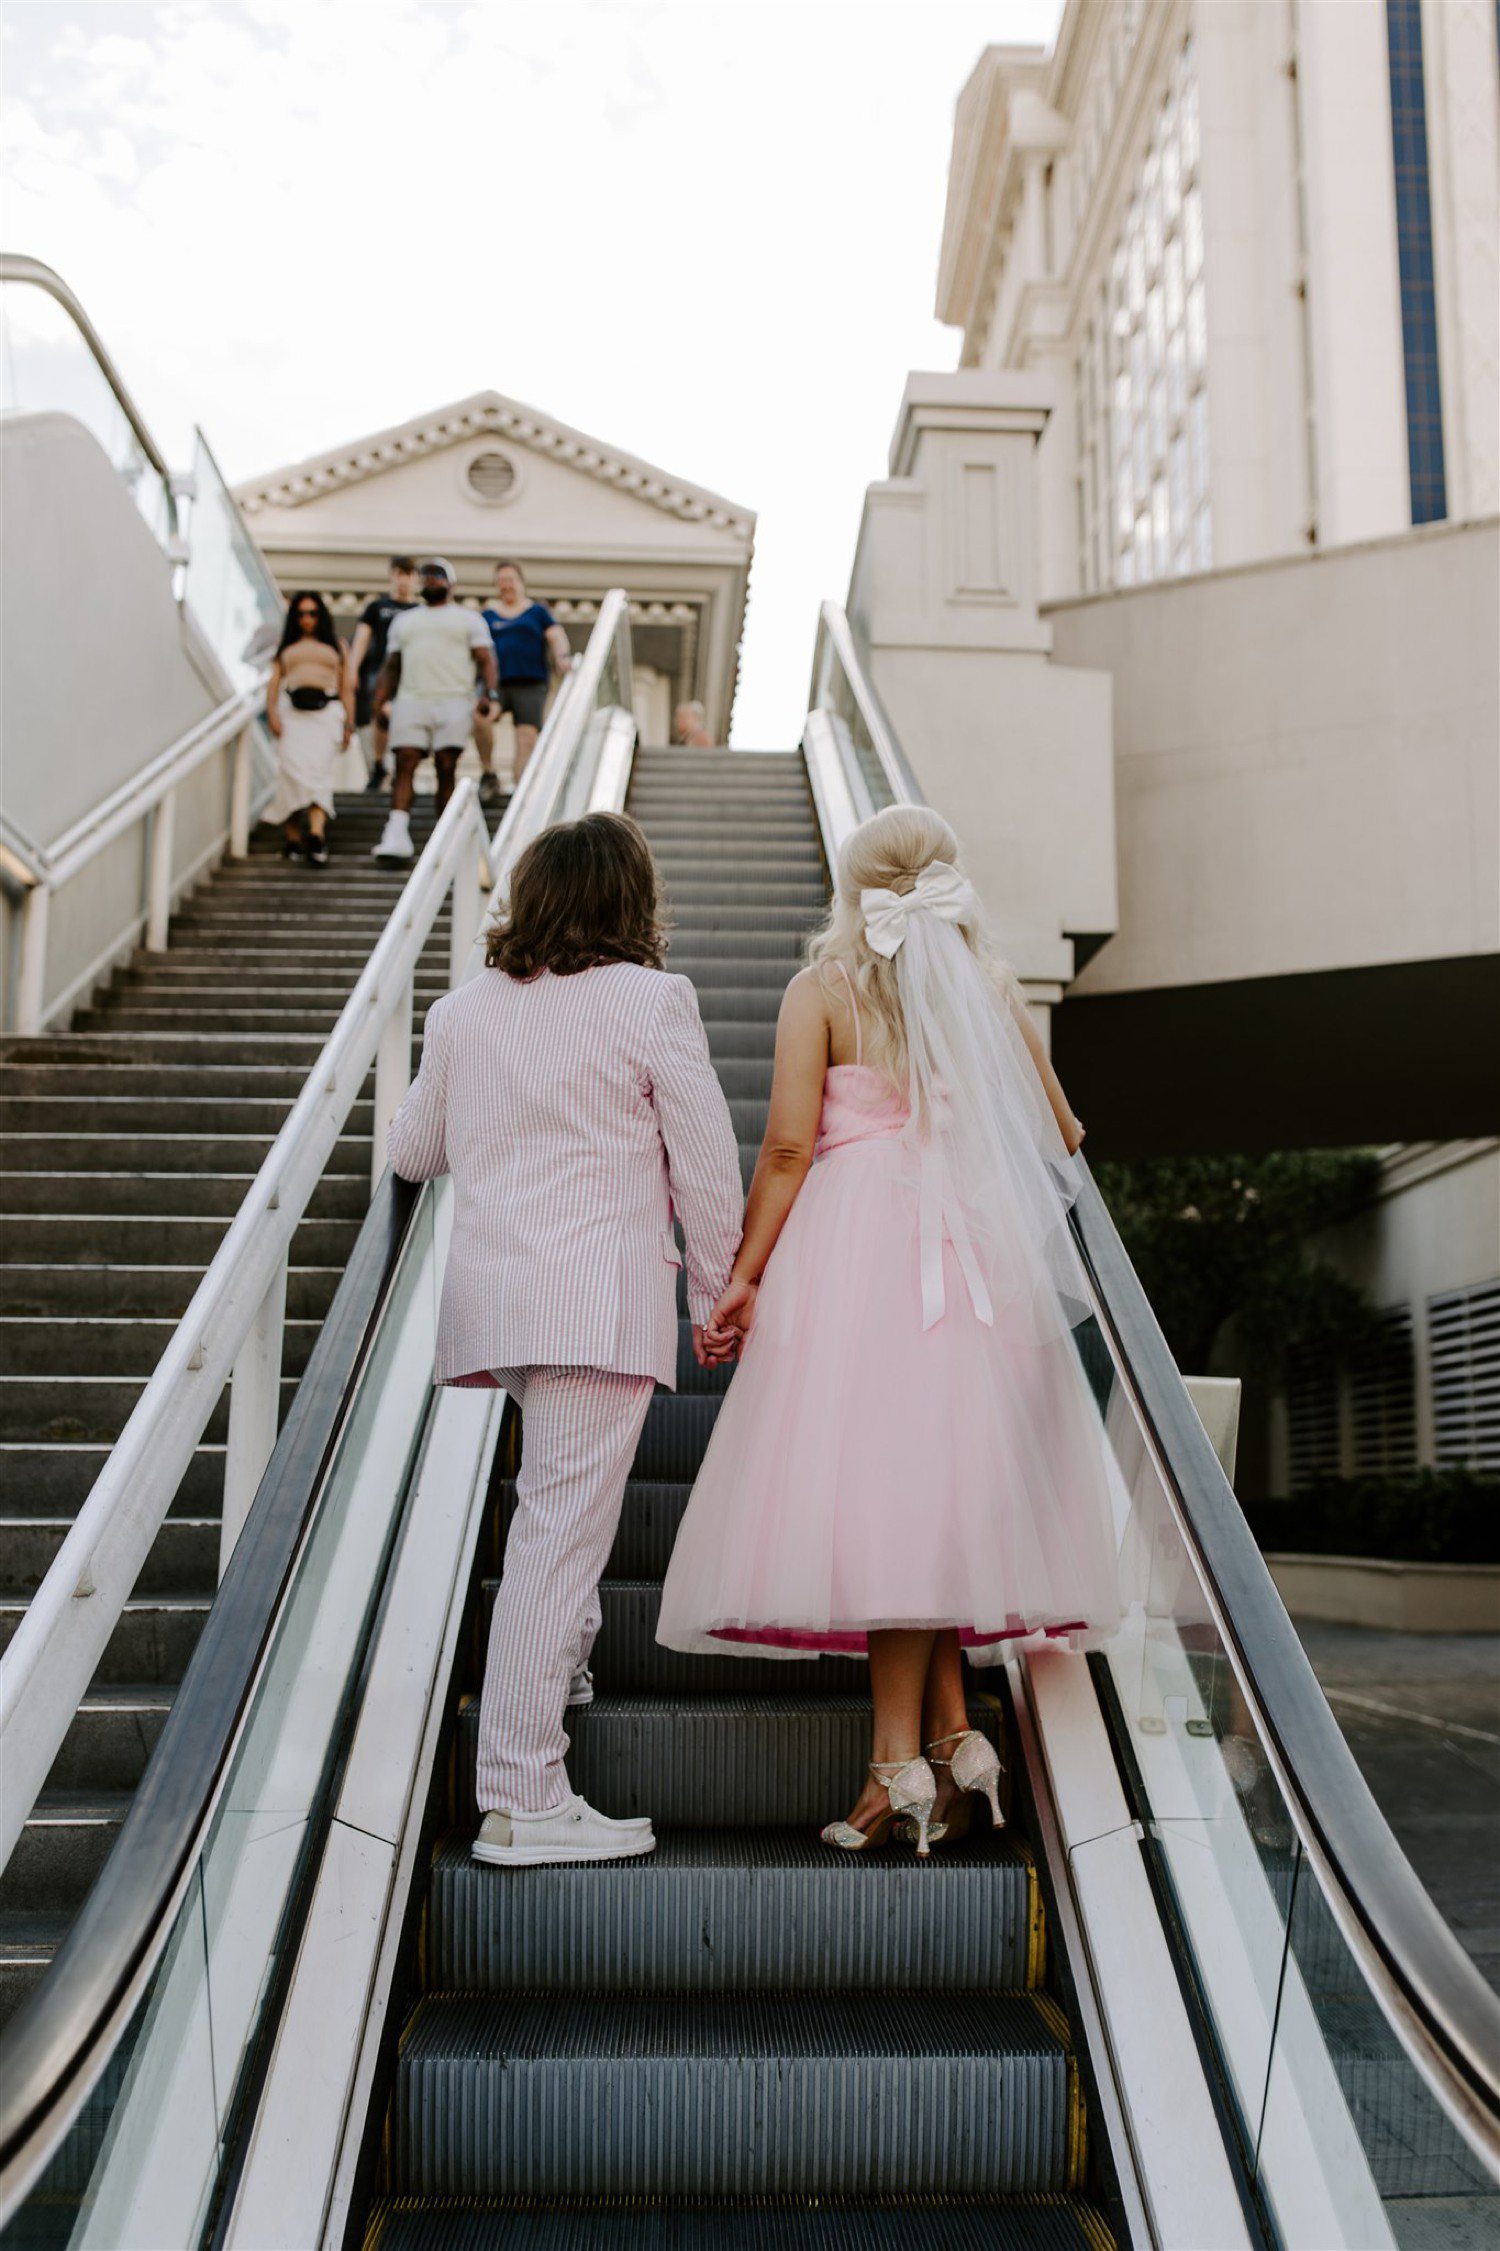 Bride and groom riding escalator together in Las Vegas.